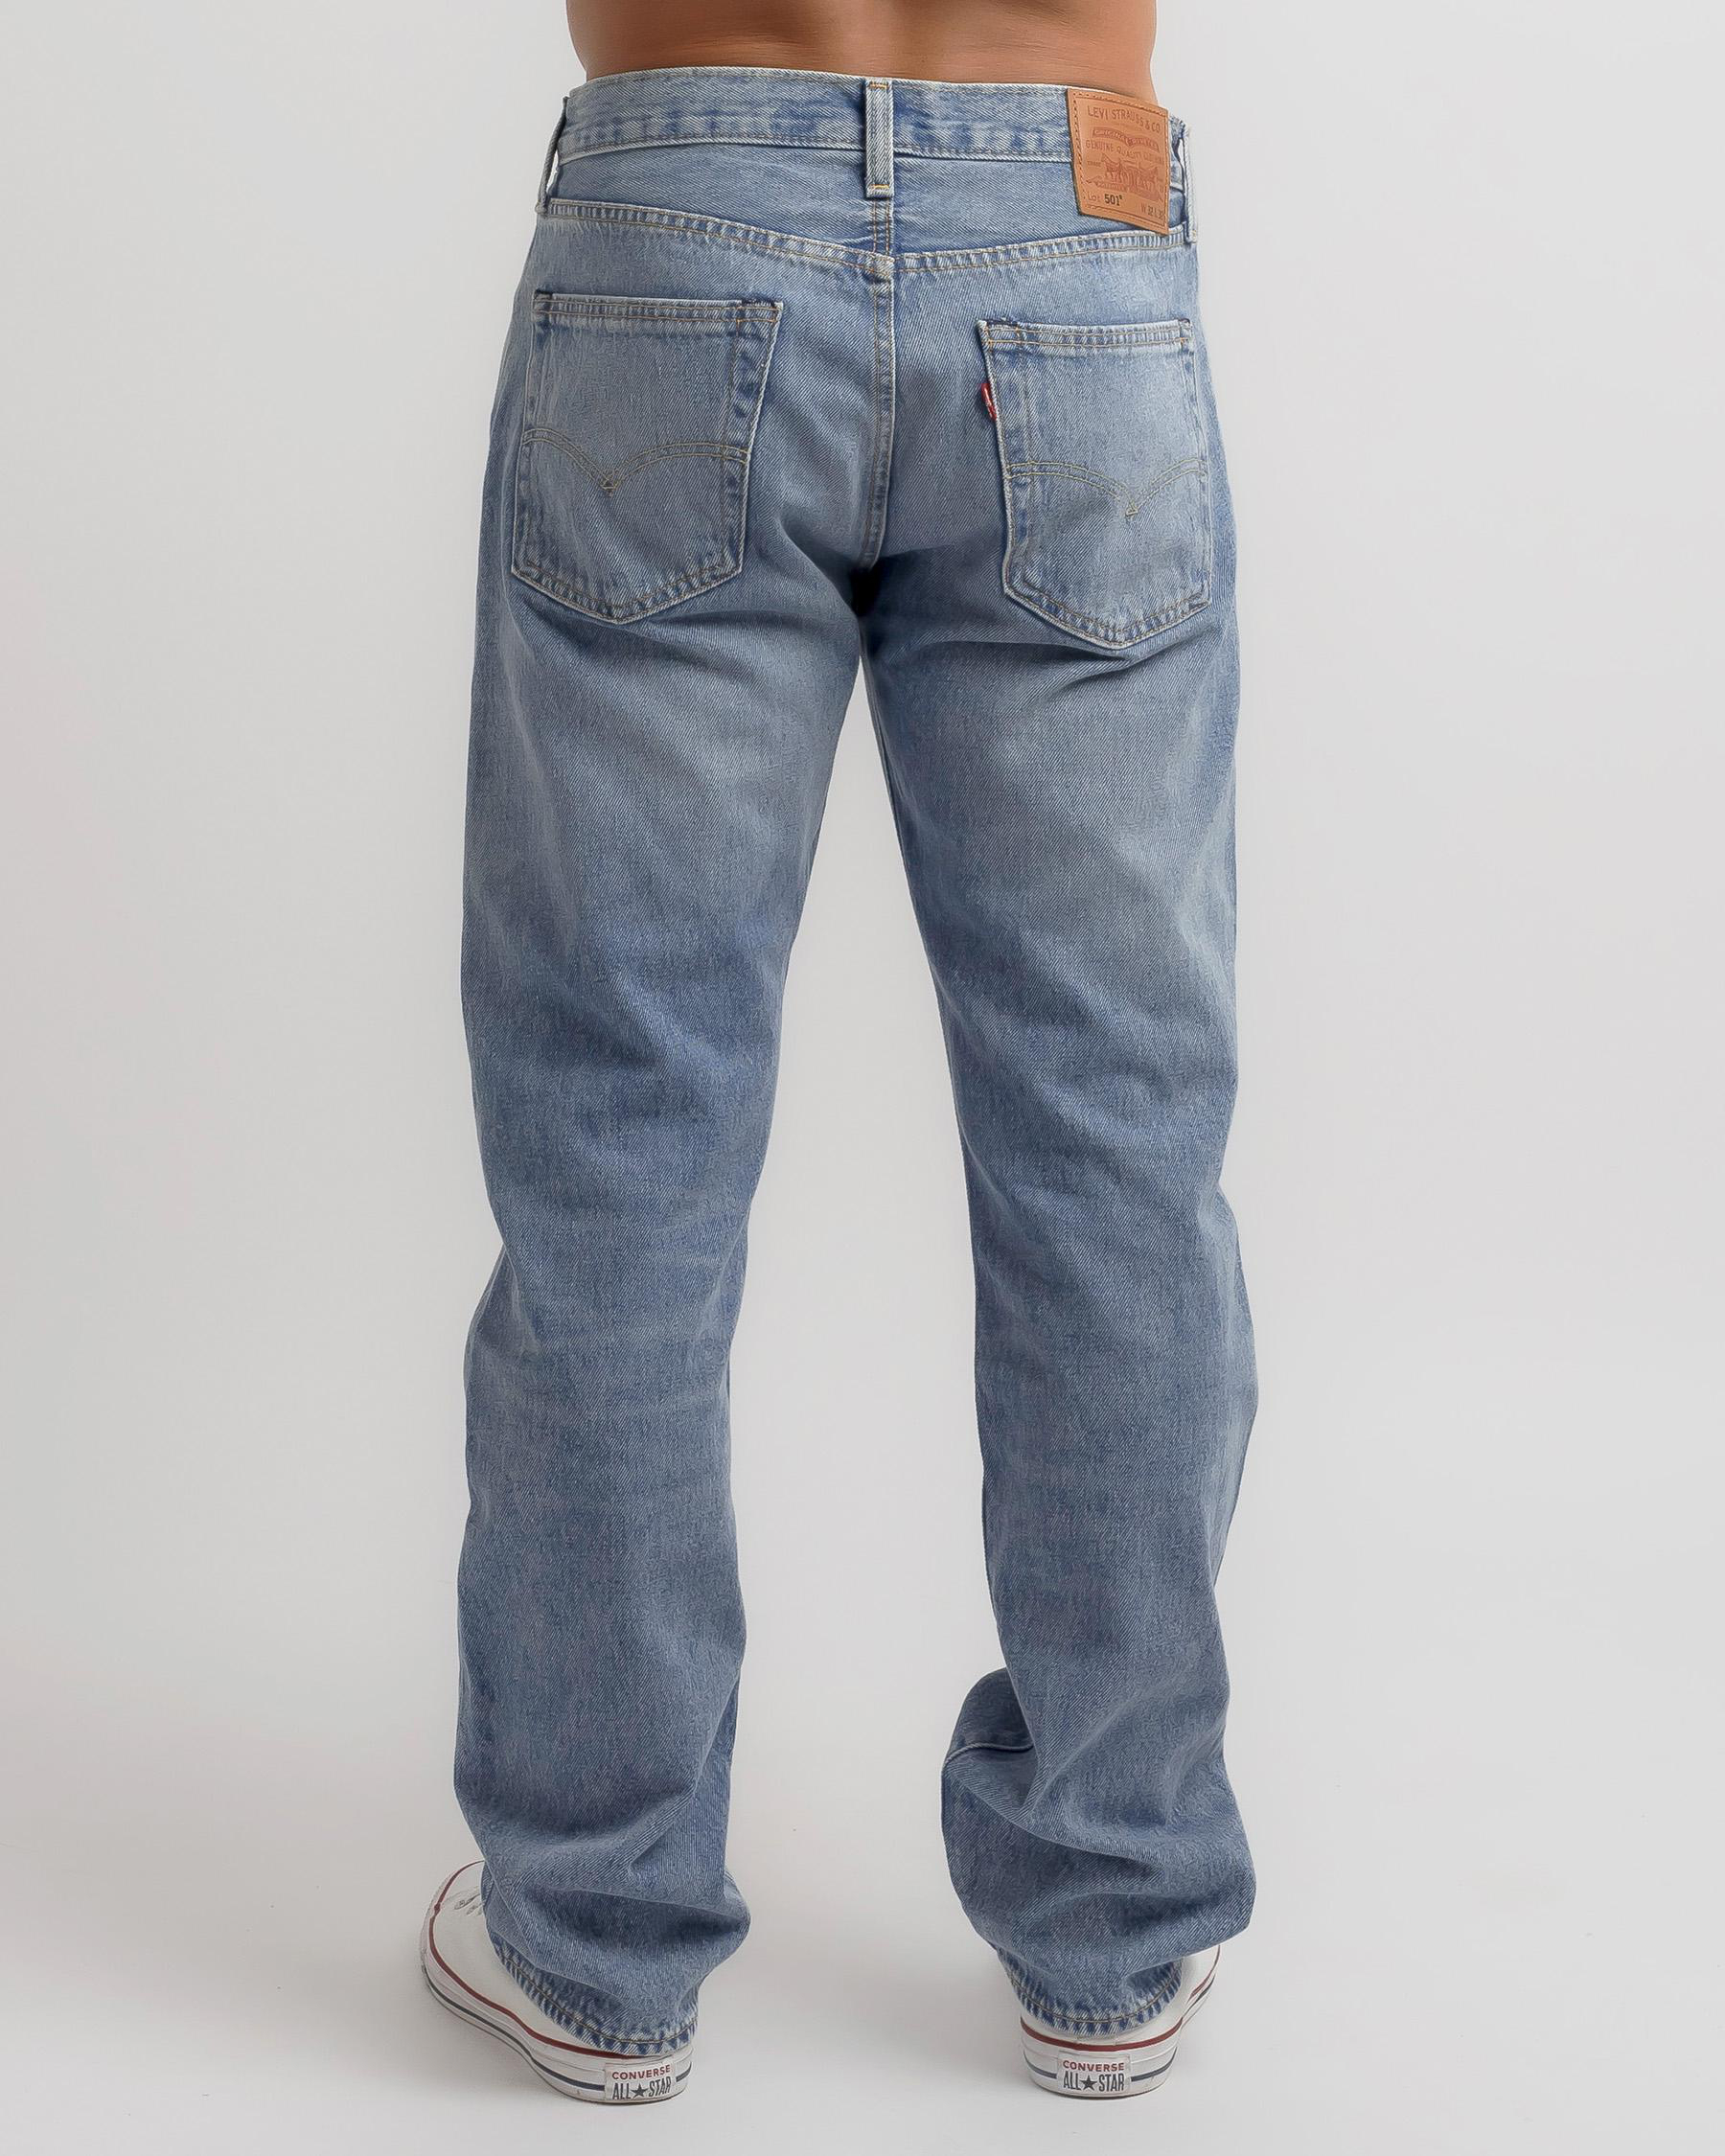 Shop Levi's 501 Original Jeans In Glassy Waves - Fast Shipping & Easy ...